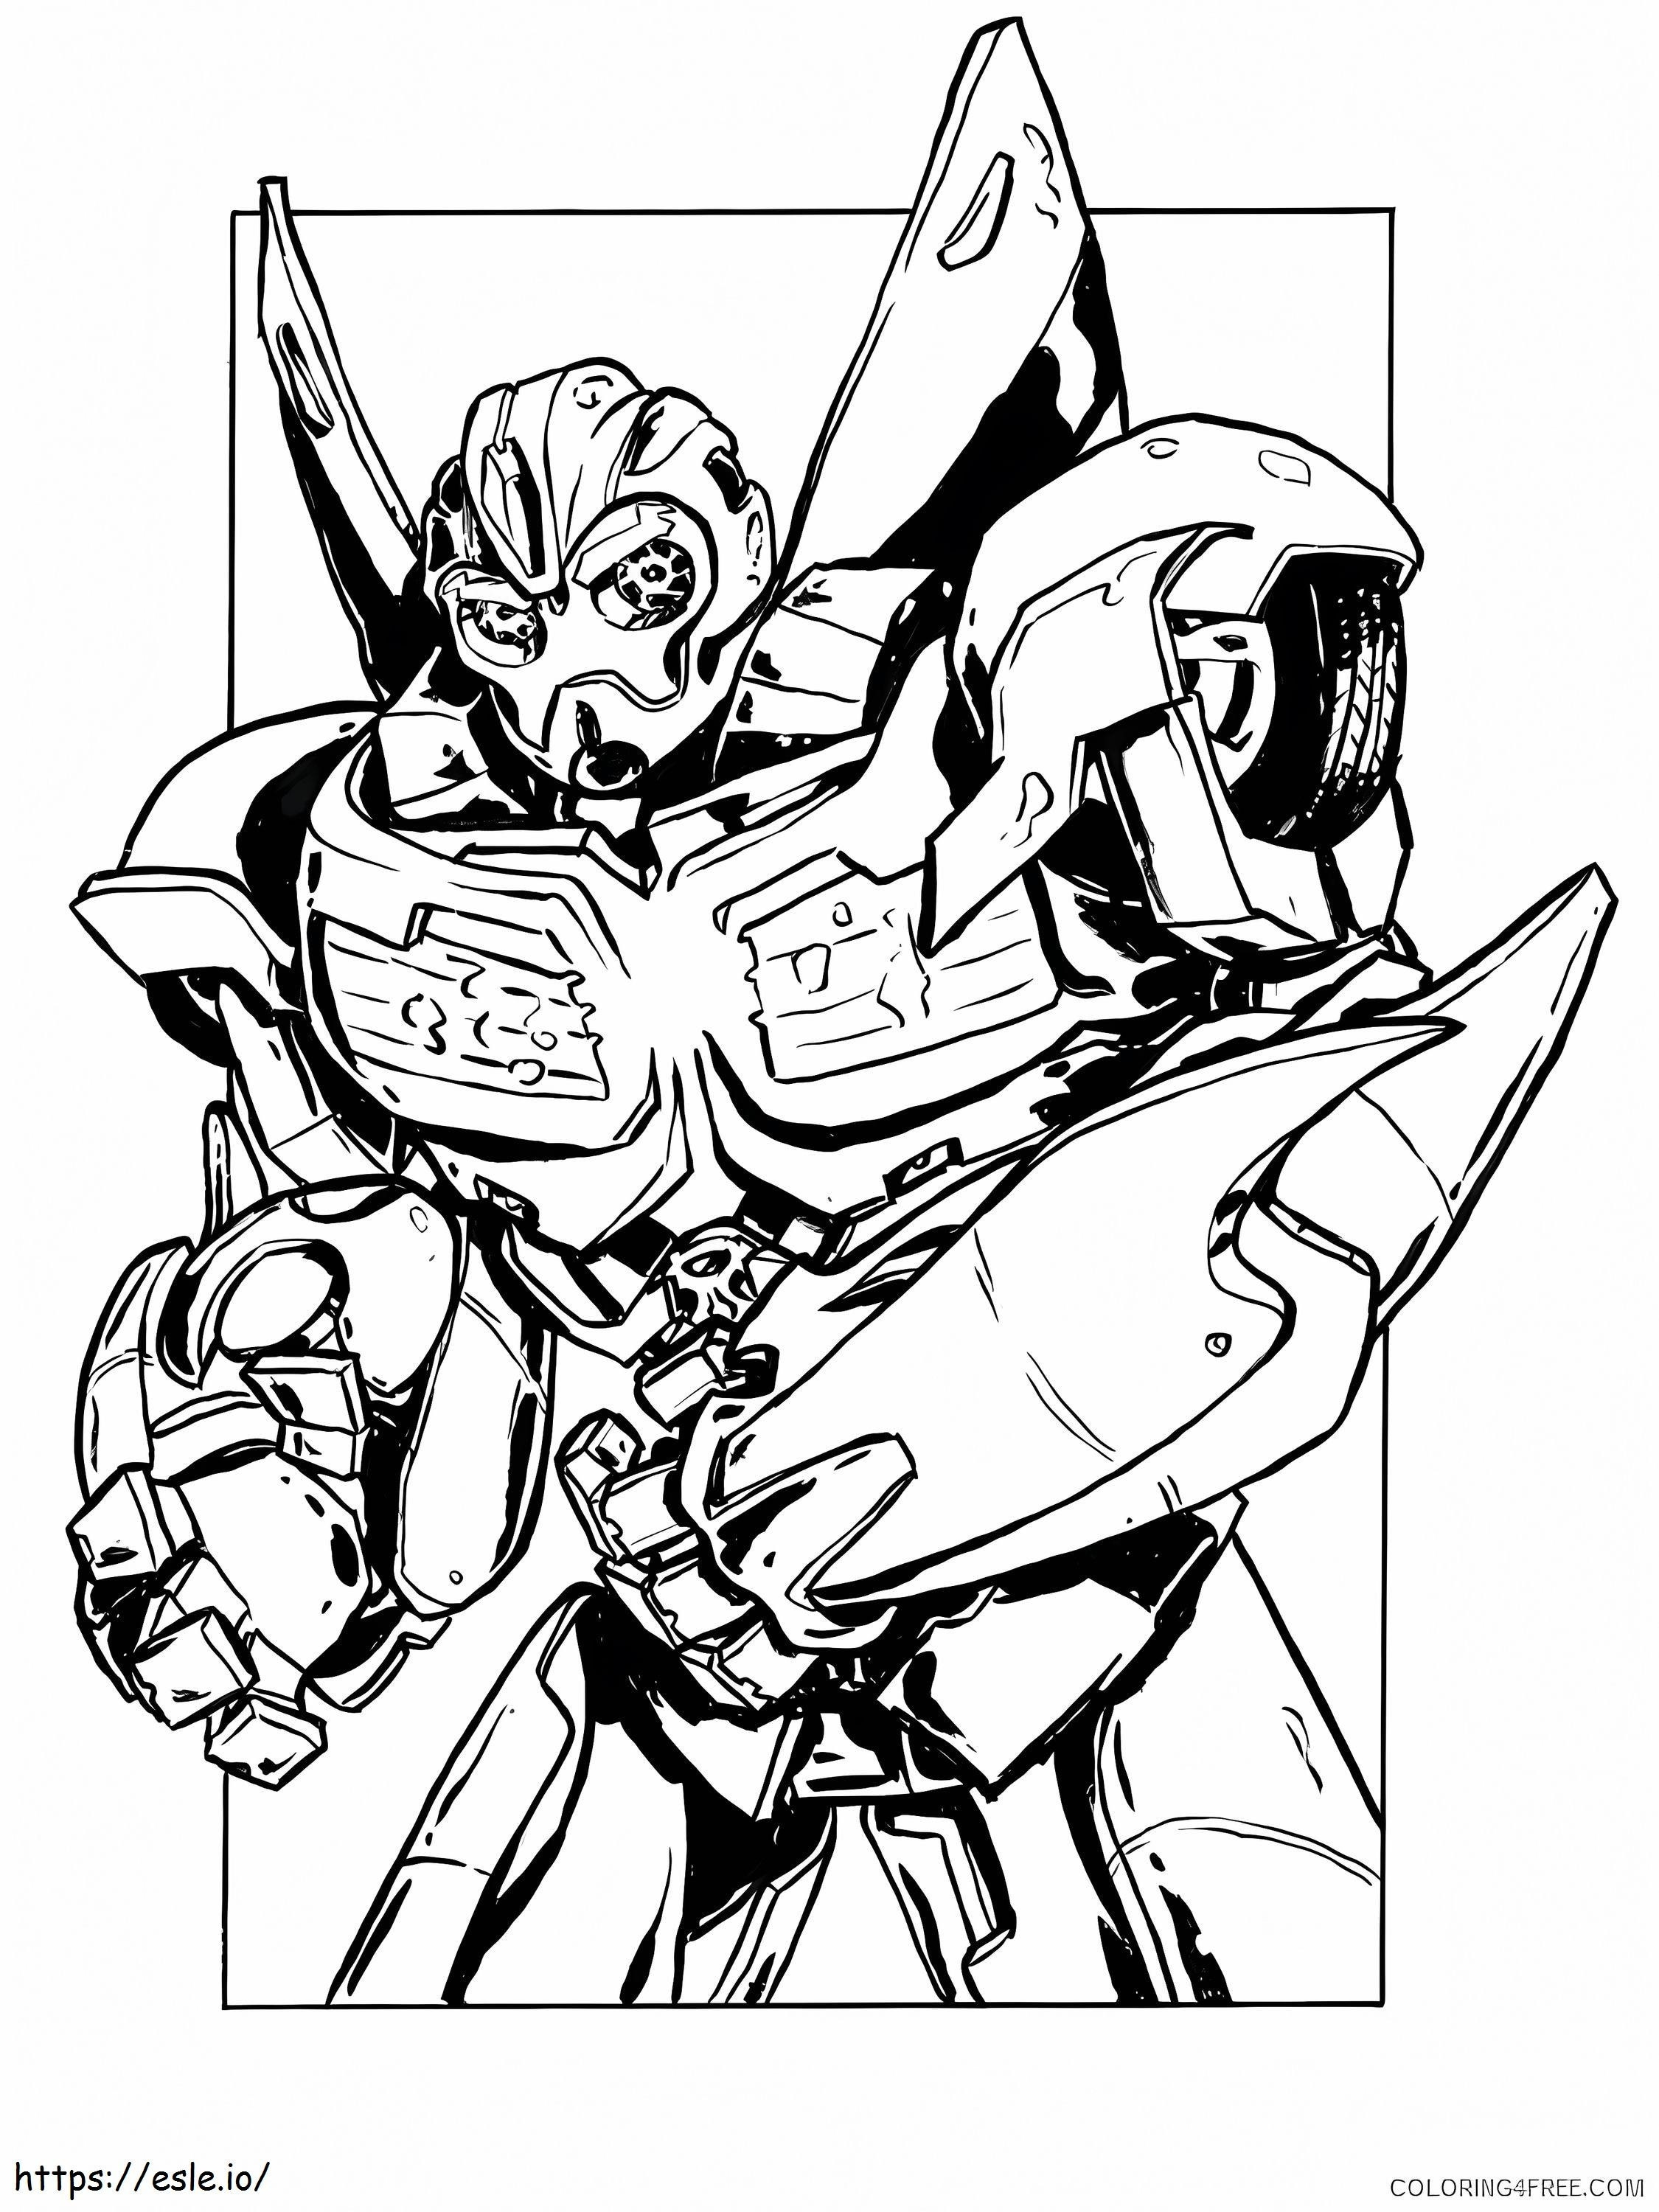 Bumblebee 6 coloring page